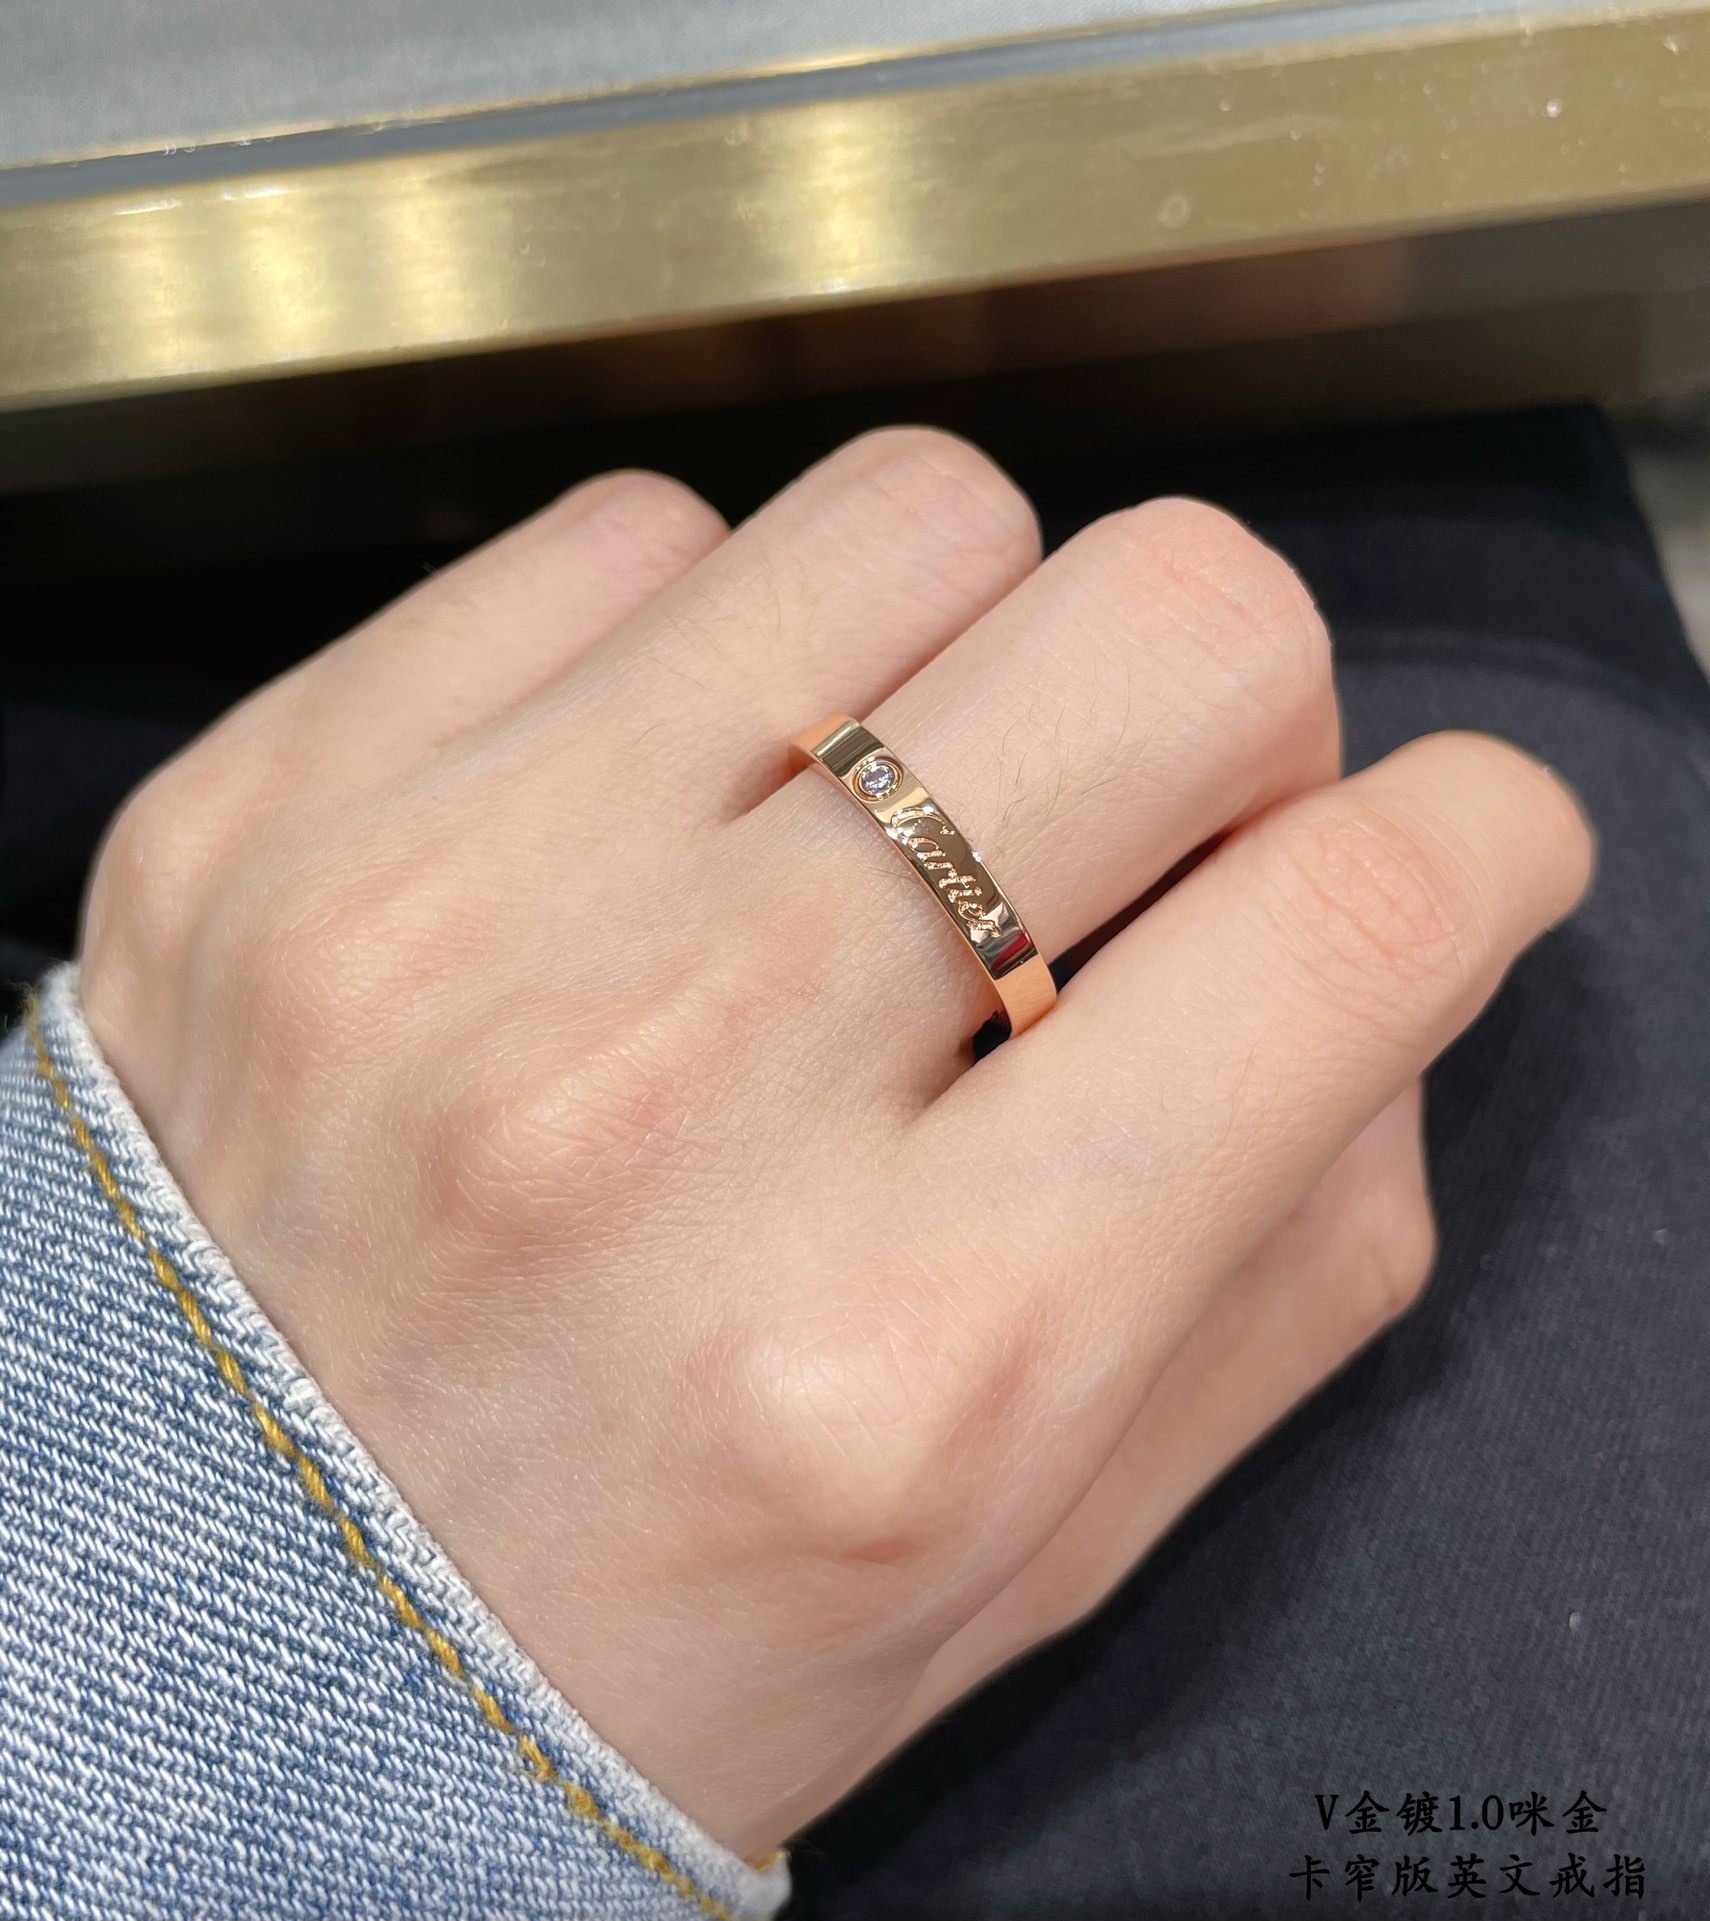 Cartier Jewelry Ring- Rose Gold Set With Diamonds